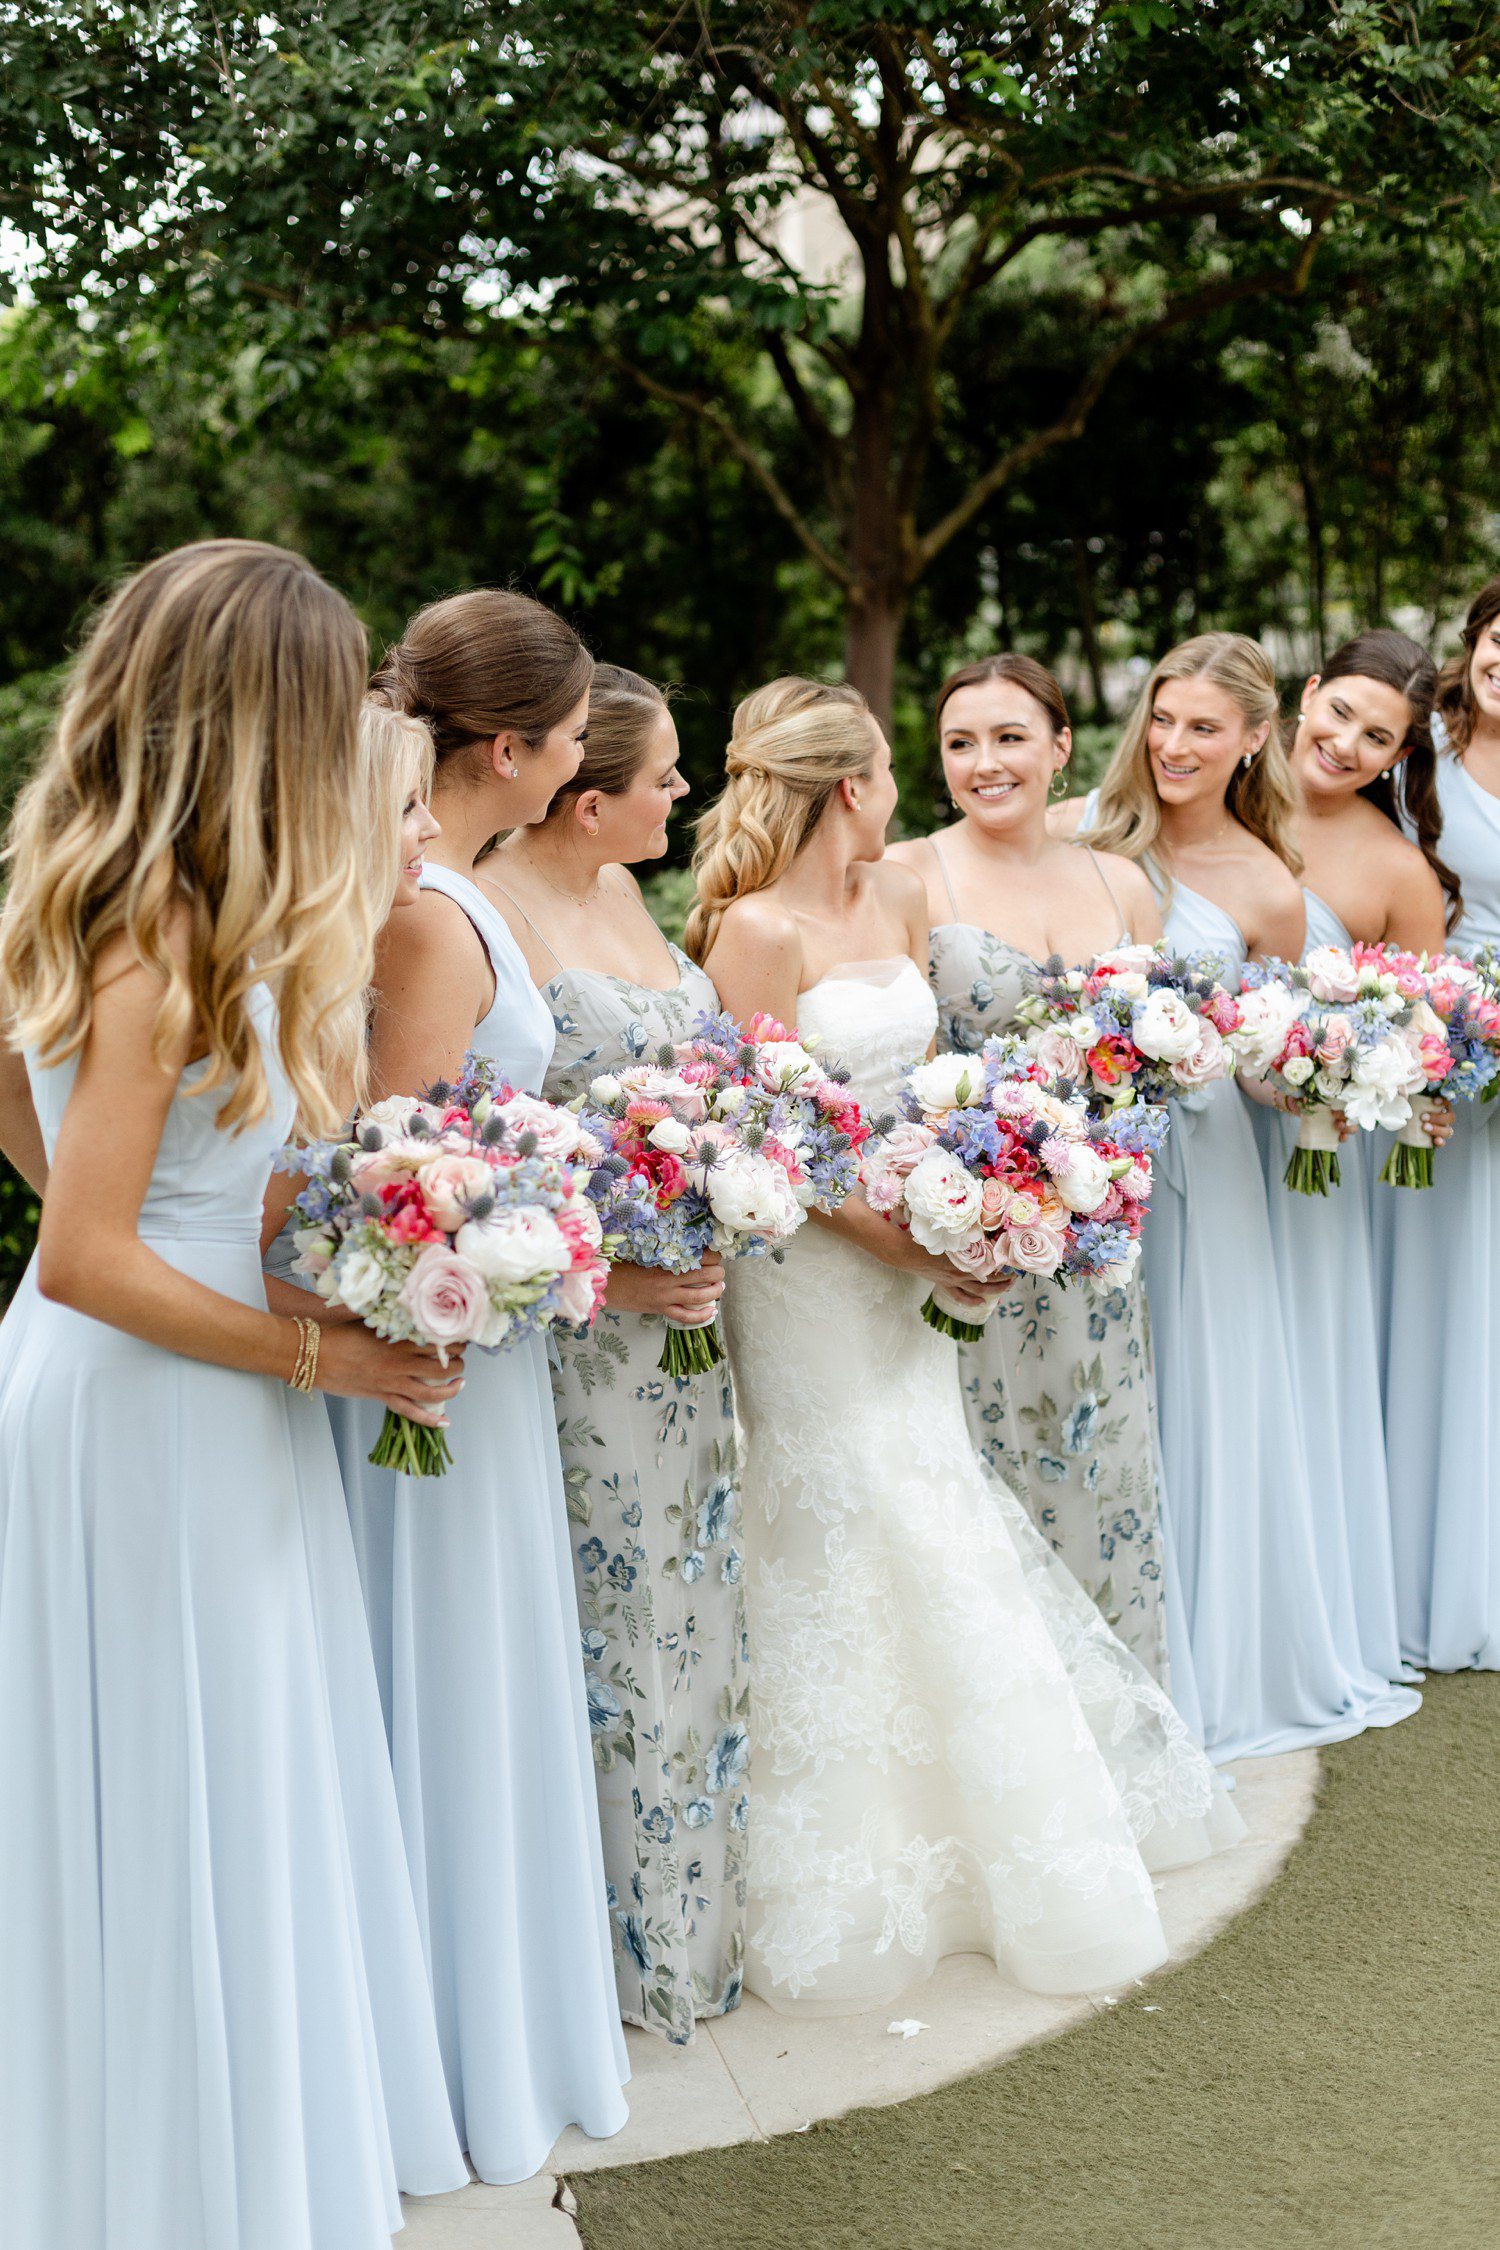 Bride and bridesmaids in light blue dresses holding colorful bouquets. 